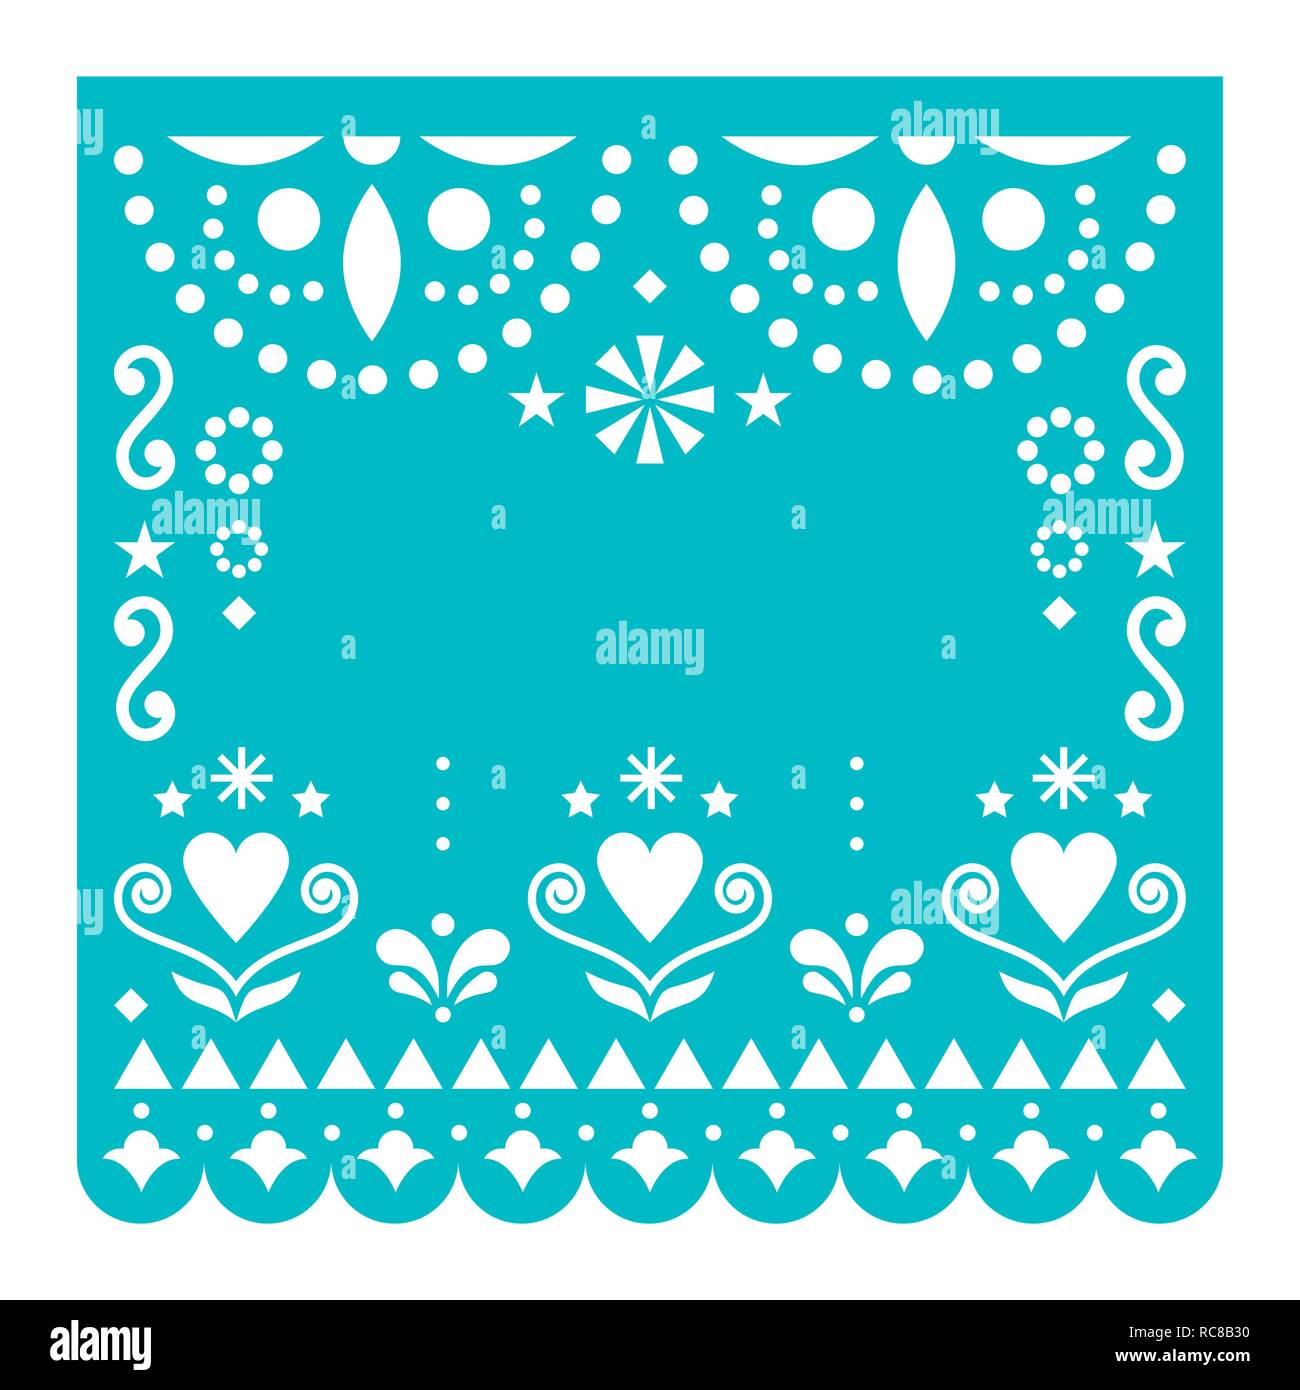 Papel Picado template with no text vector design, Mexican turquoise paper fiesta decoration from Mexico with flowers and geometric pattern Stock Vector